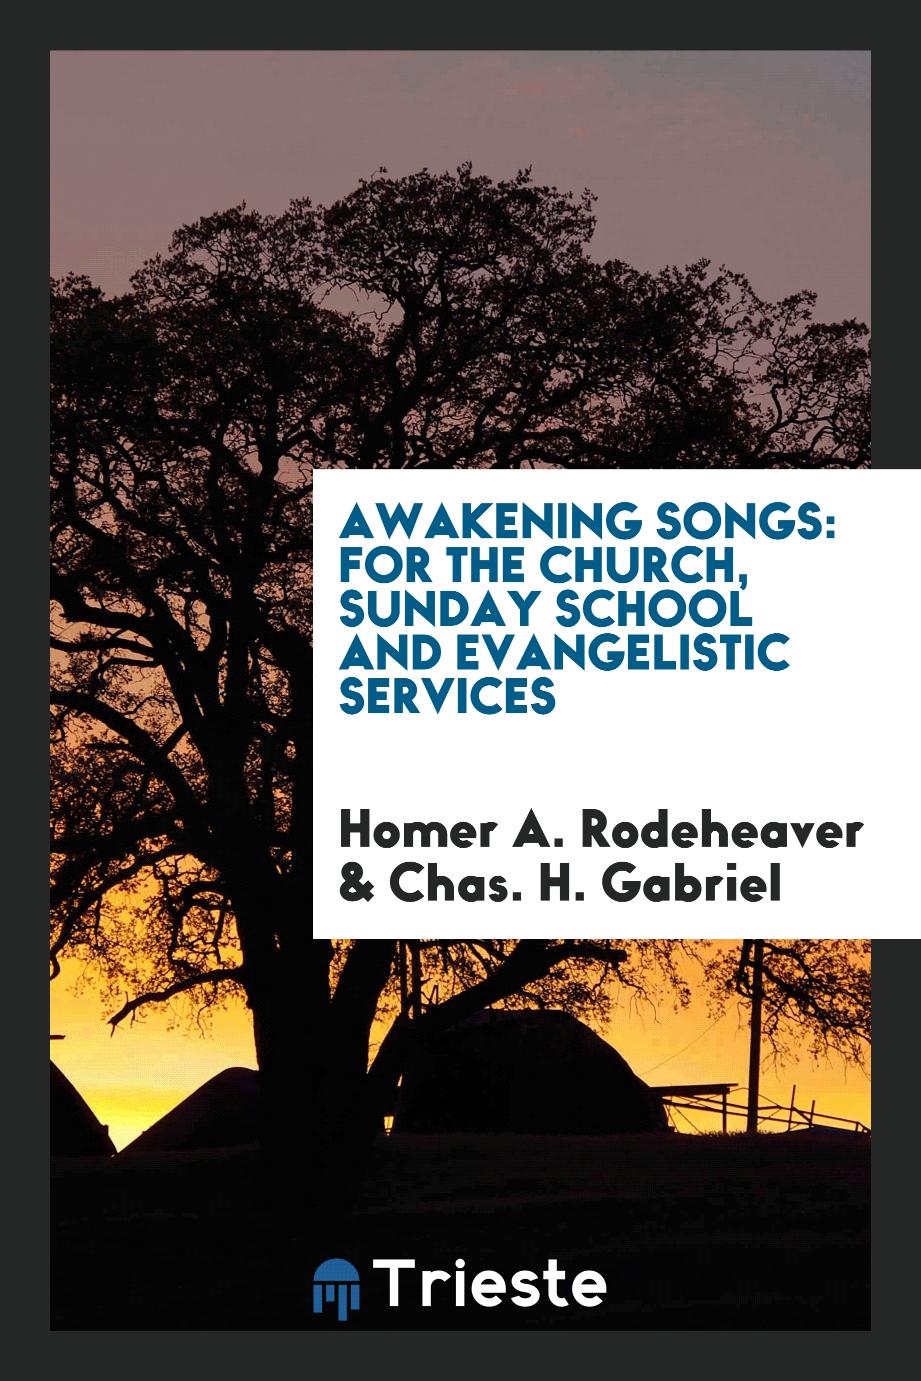 Awakening songs: for the church, Sunday school and evangelistic services